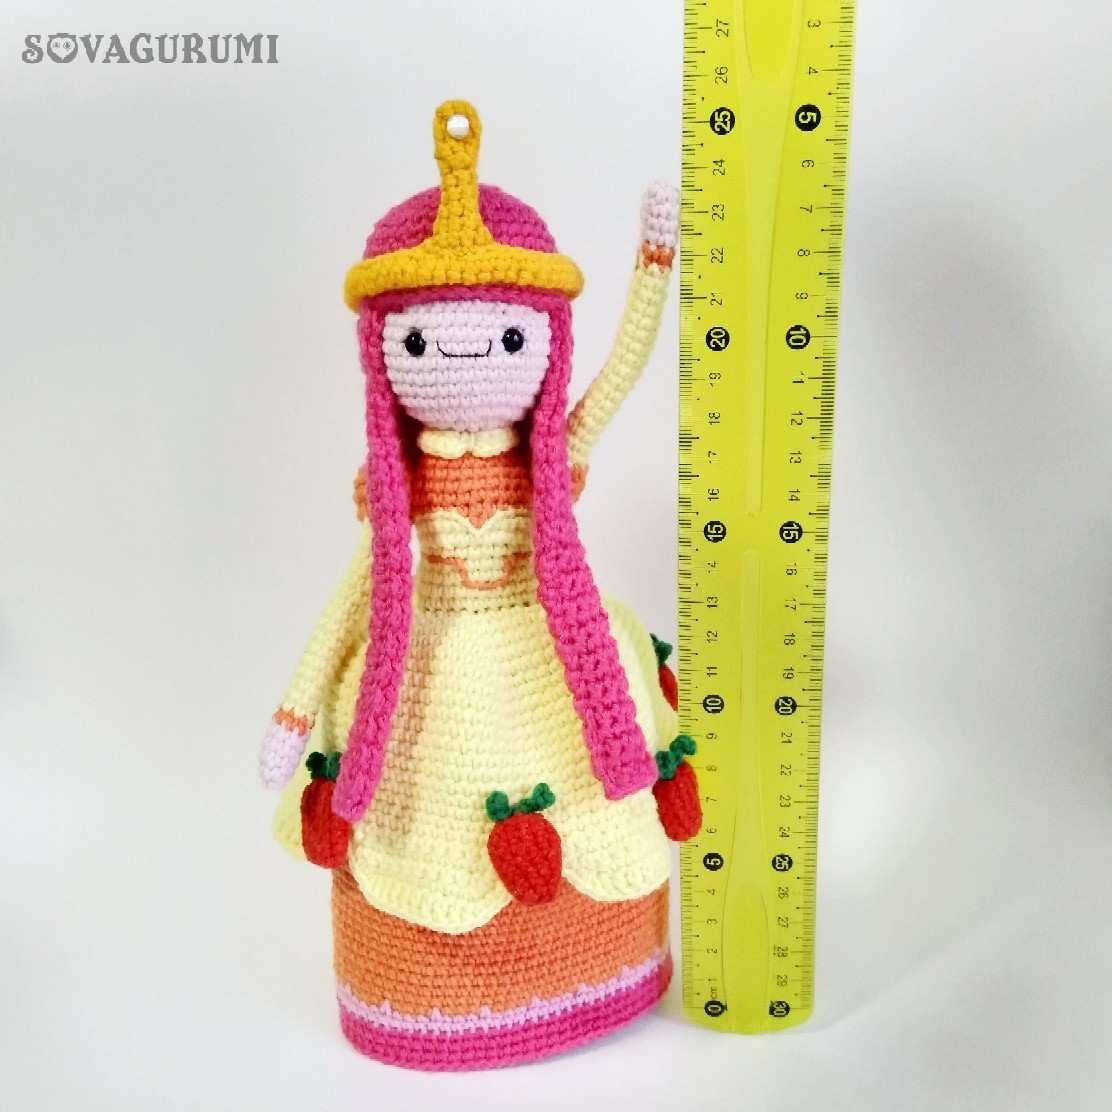 December cartoons - My, Needlemen, Needlework without process, Amigurumi, Knitted toys, Despicable Me, Bubble gum, Longpost